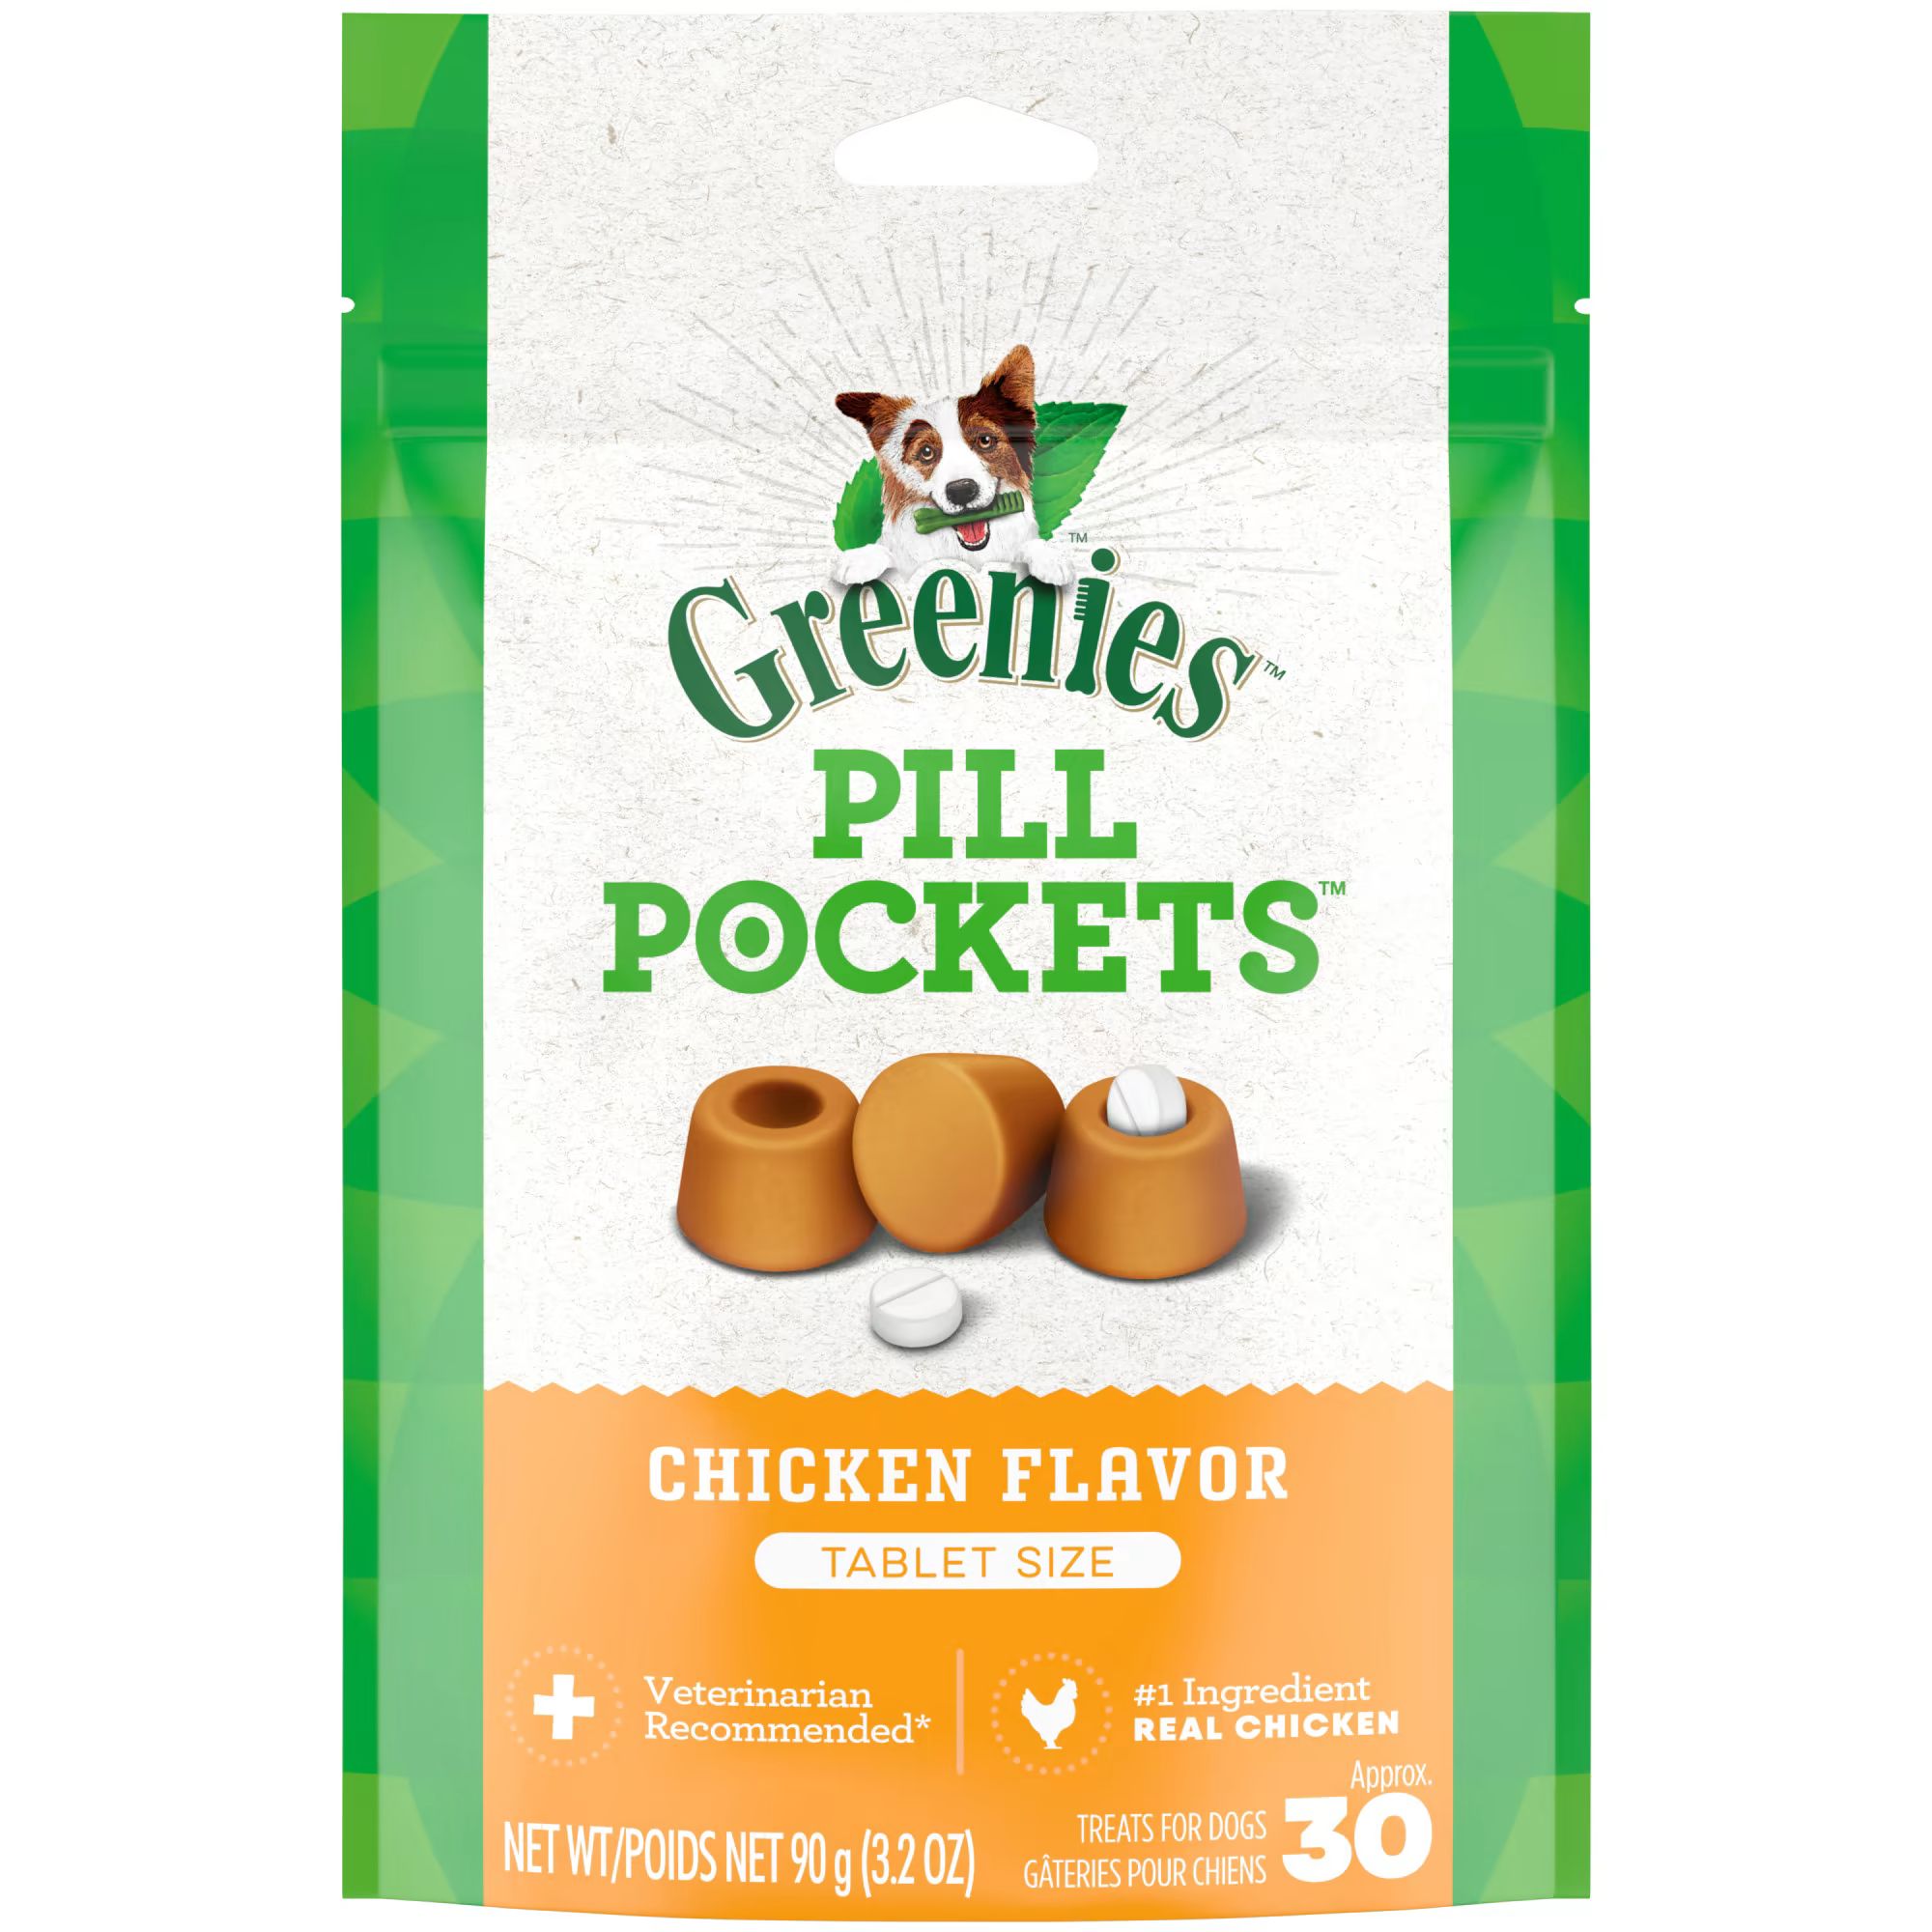 Greenies Pill Pockets Tablet Size Chicken Flavor Dog Treats, 3.2 oz., Count of 30 | Petco